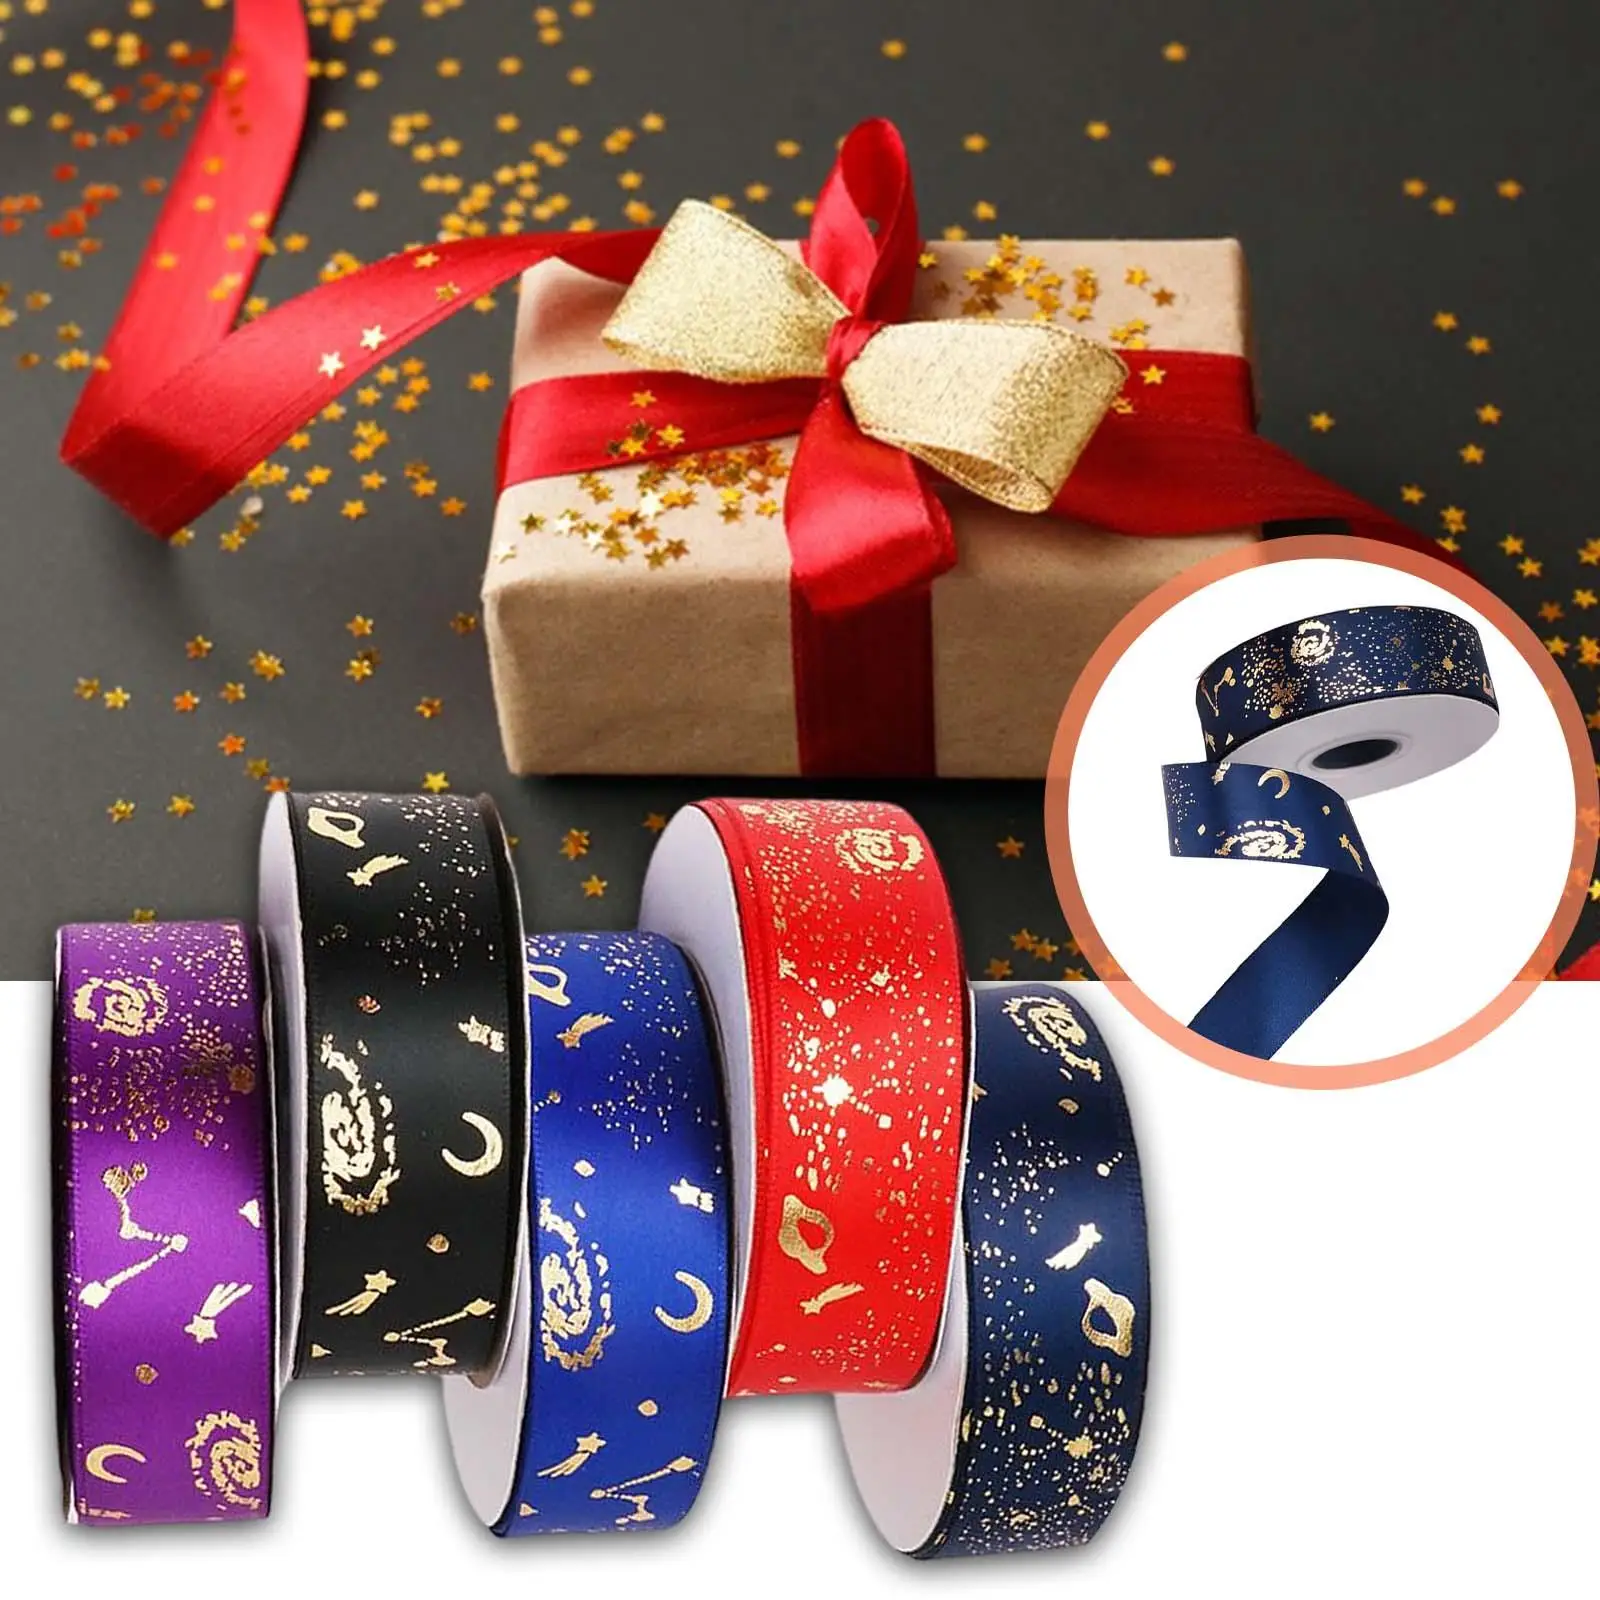 5x Colorful Satin Ribbon 24 Yards Each Roll Decorative Lanyards Polyester for Sewing Birthday Party Decoration New Year Wreath